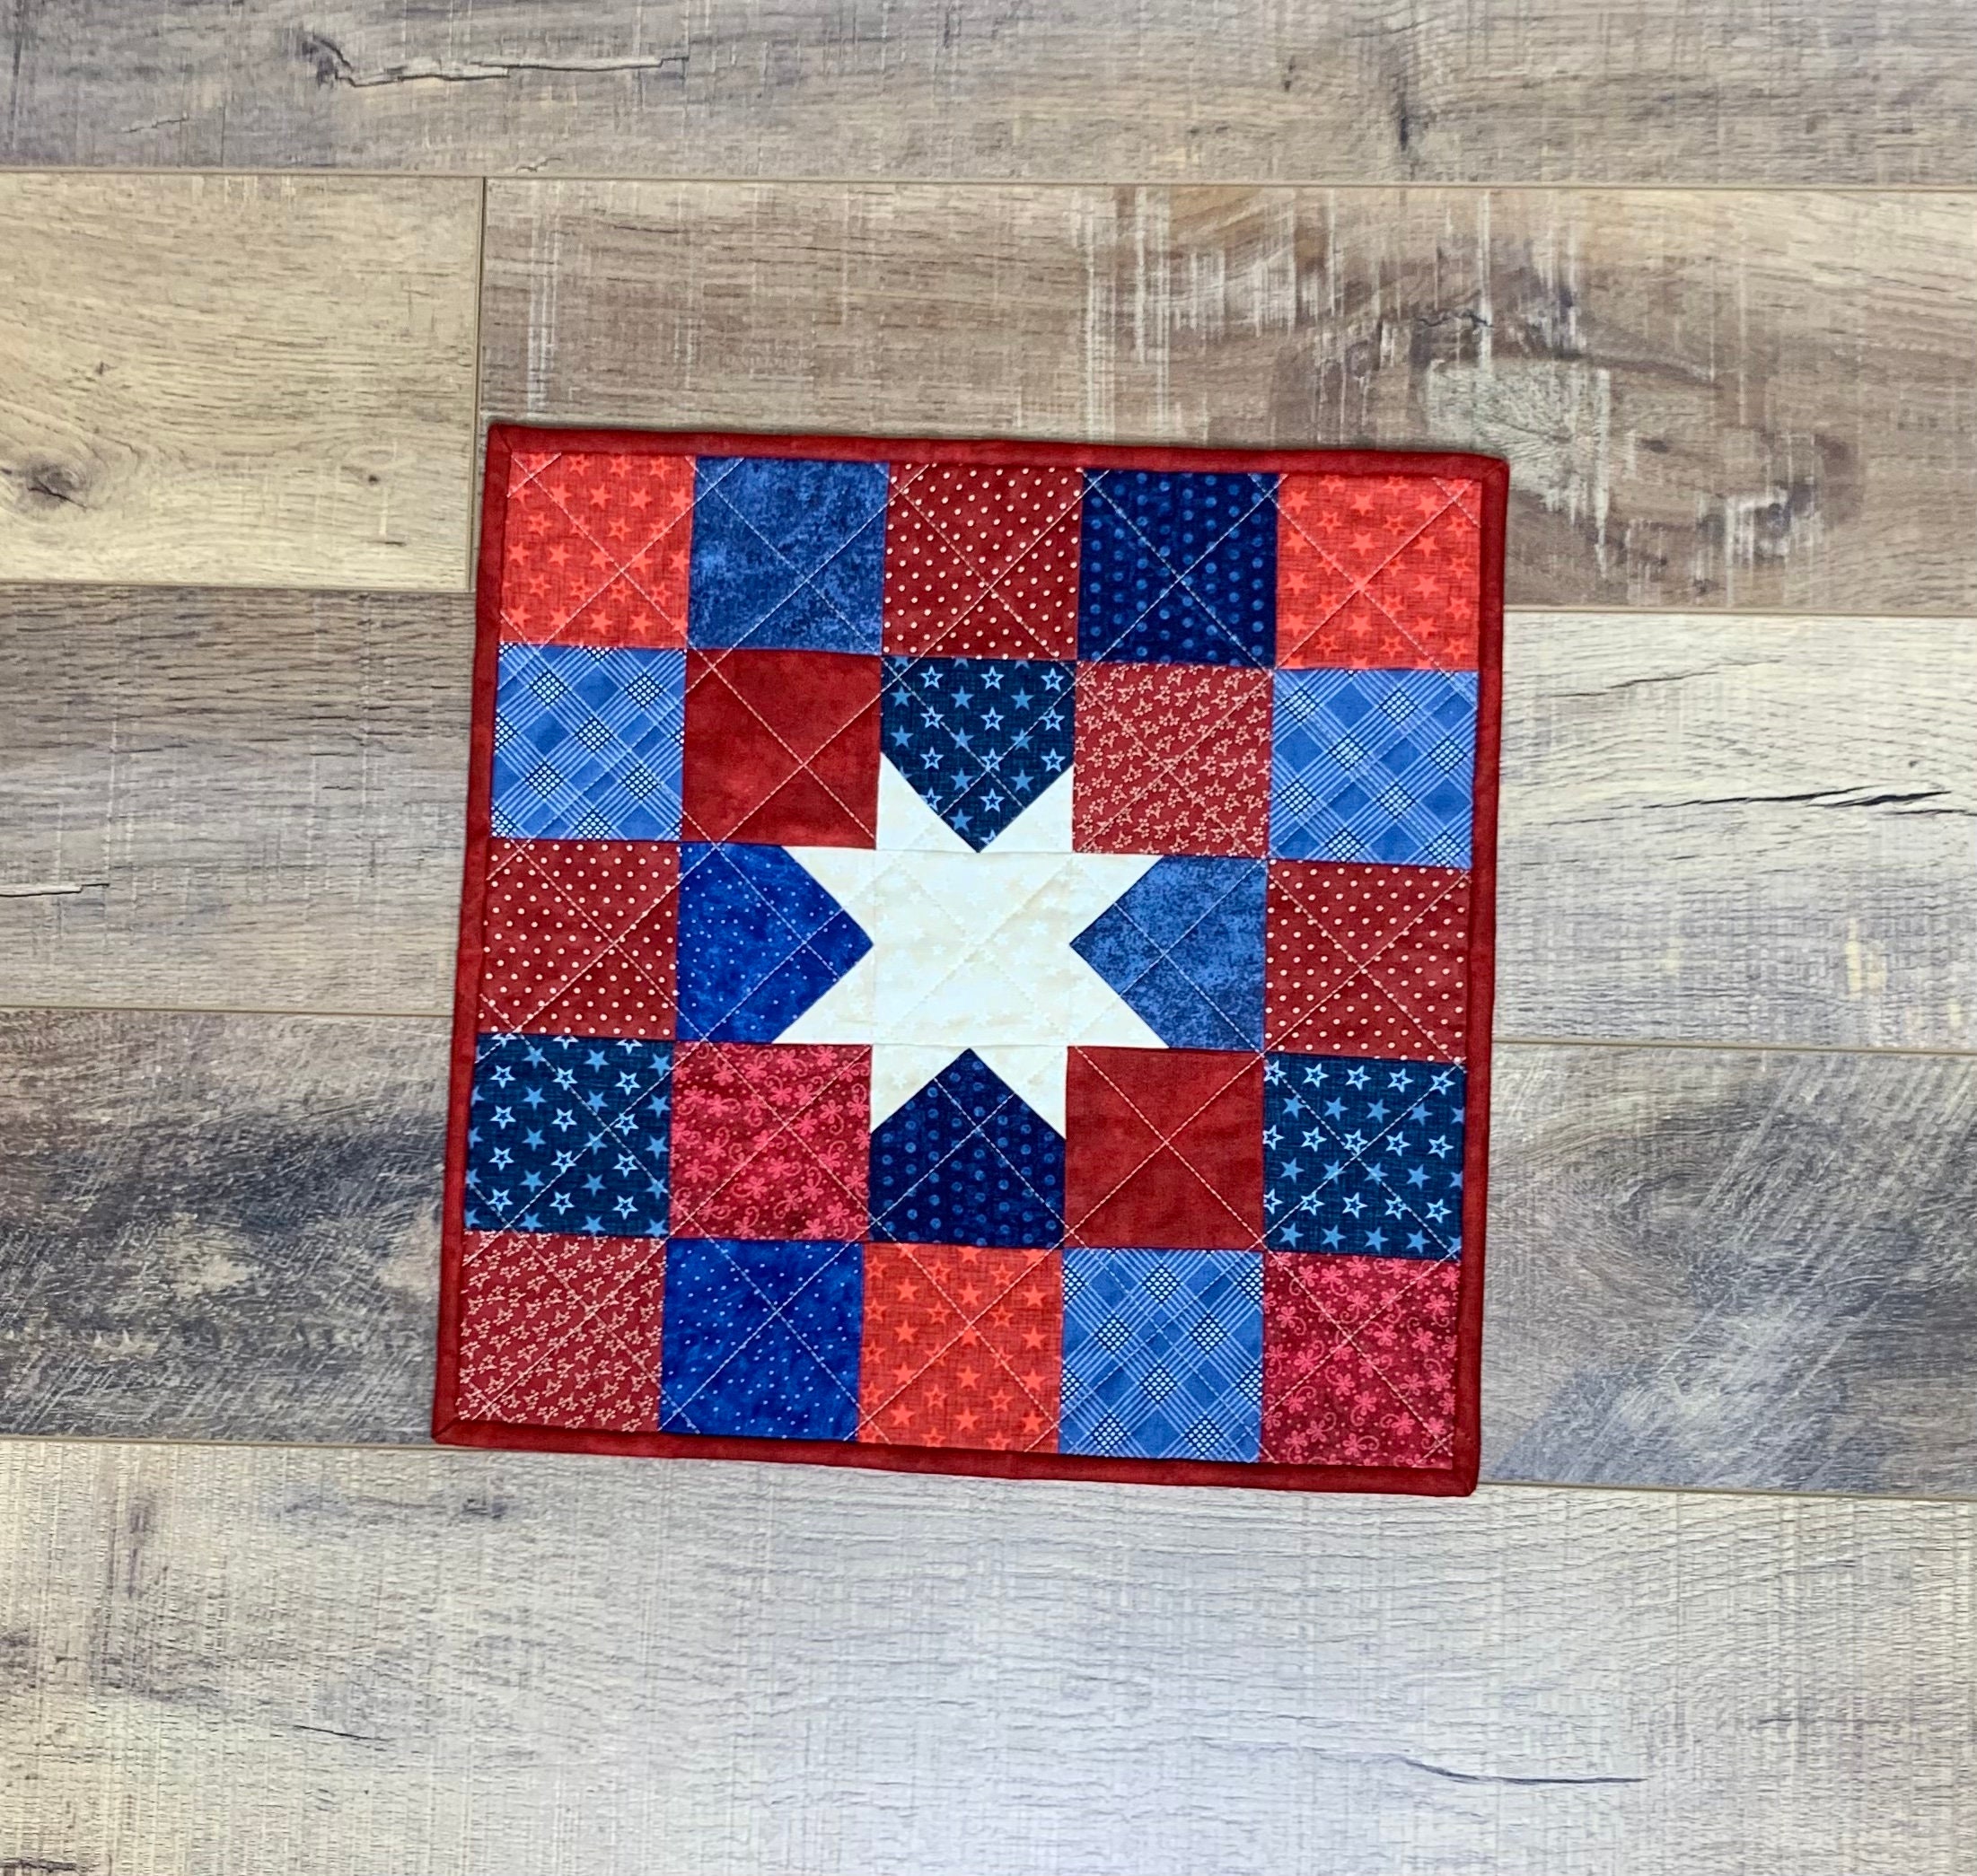 4th of July Project: Patriotic Carpenter Star Wall Hanging